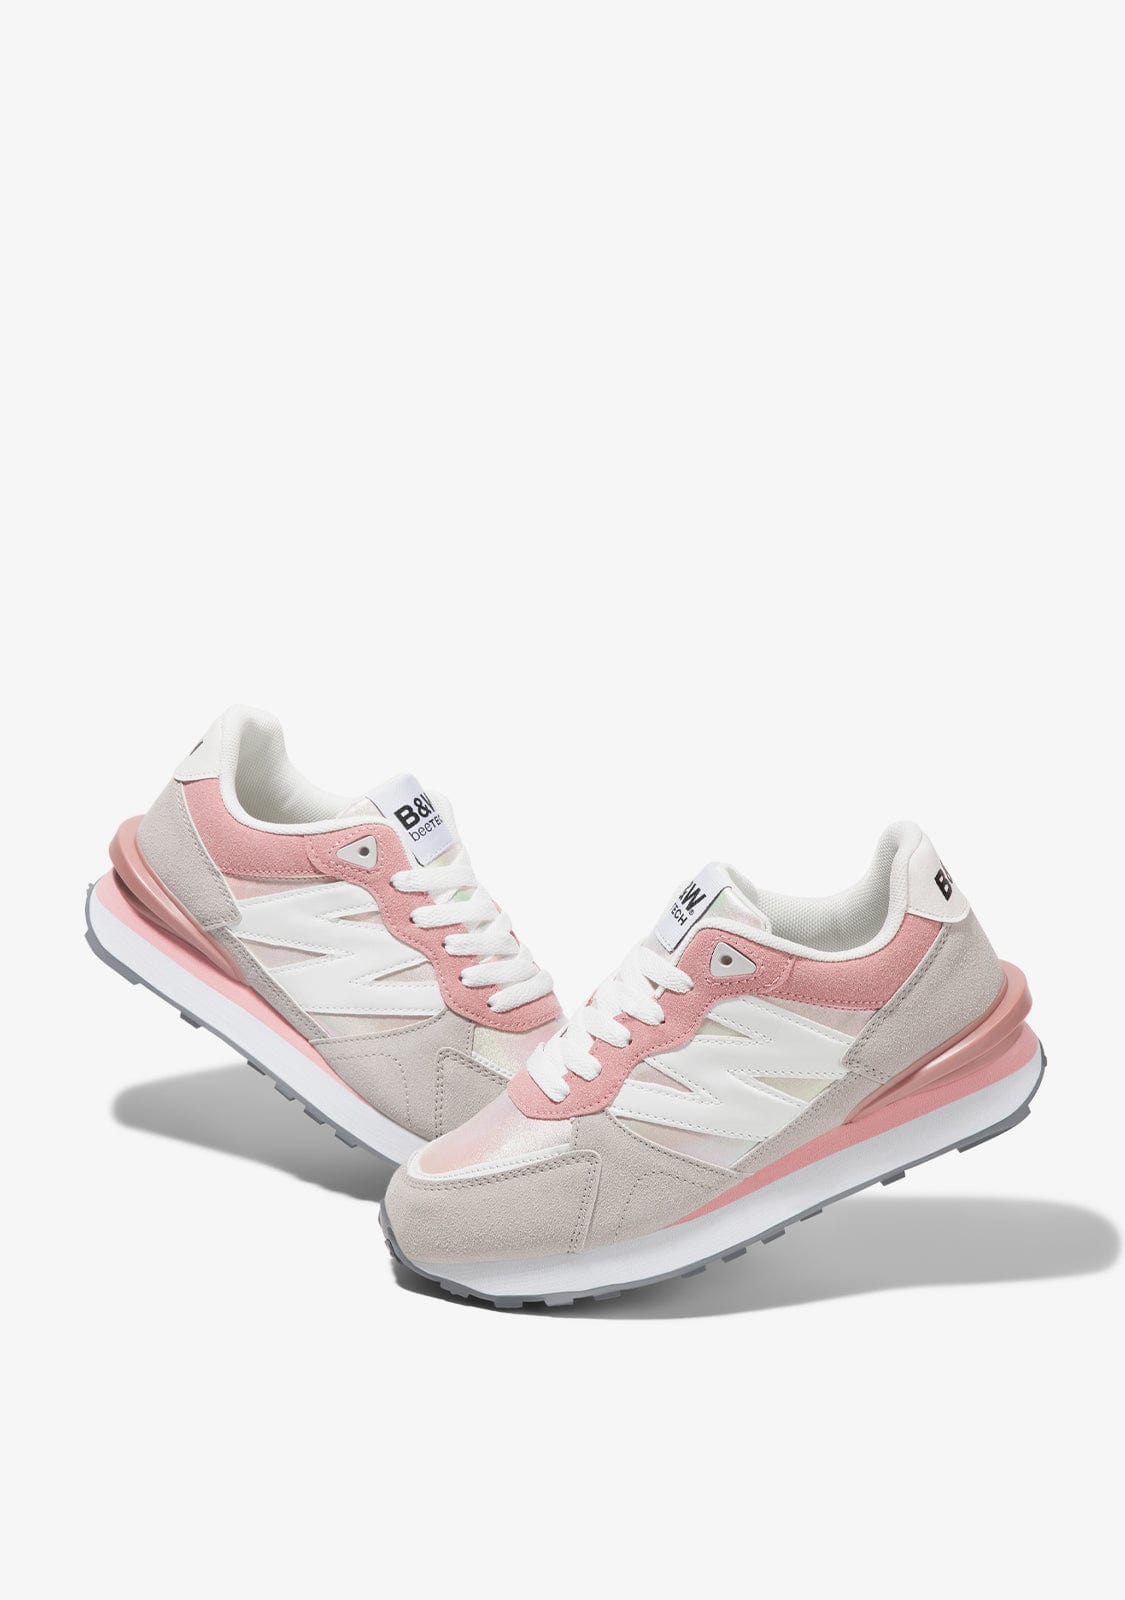 Grey/Pink Colorful Sneakers